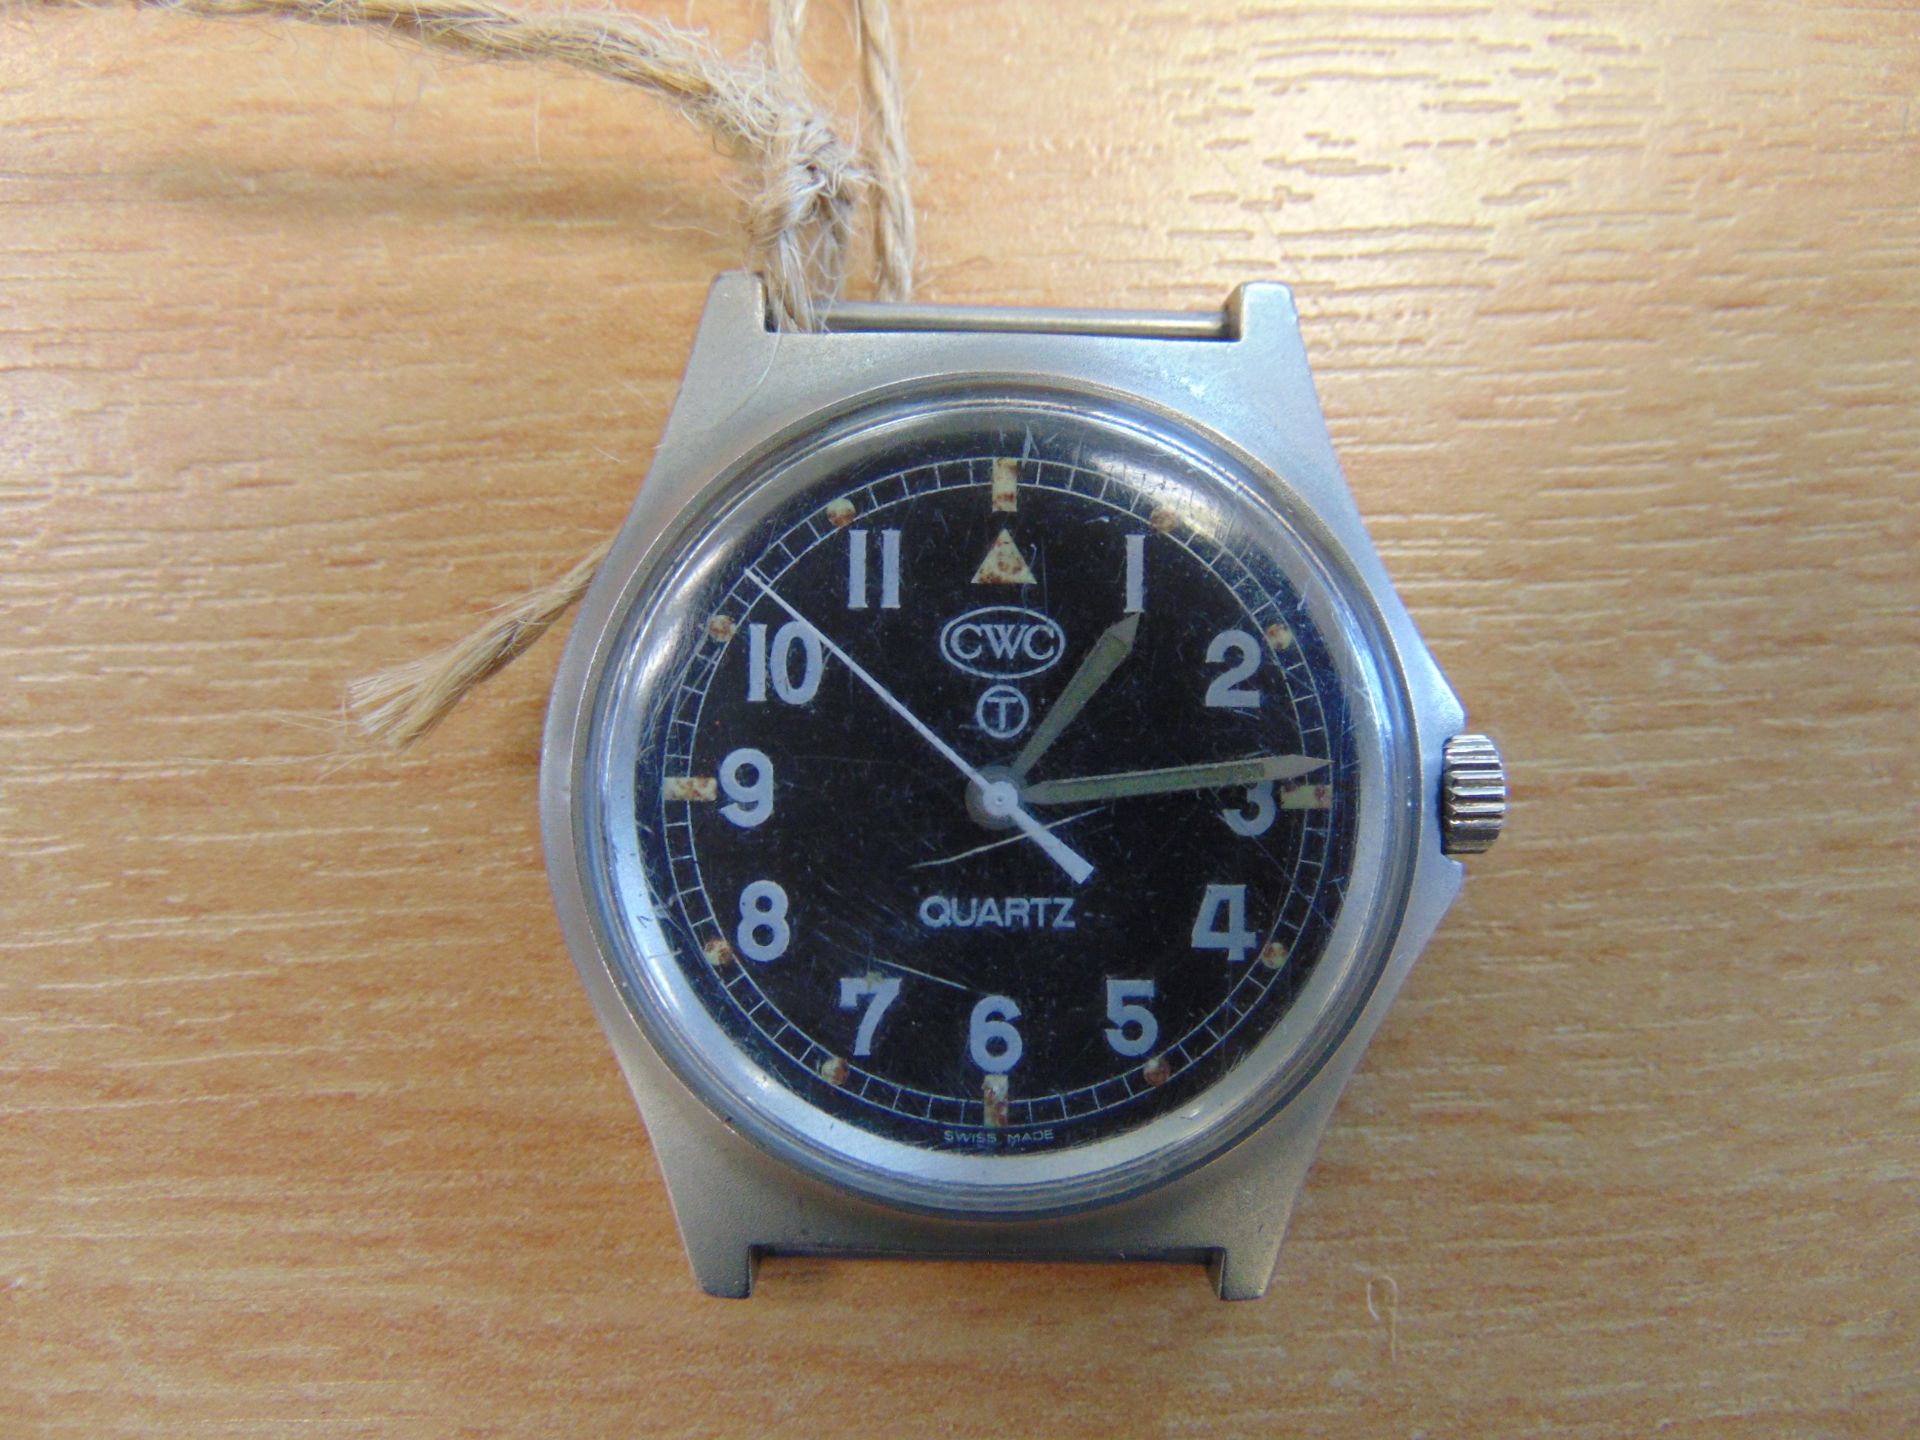 Rare CWC 0552 Royal Marines / Navy Issue Service Watch Nato Marks, Date 1990, * GULF WAR 1 * - Image 3 of 4